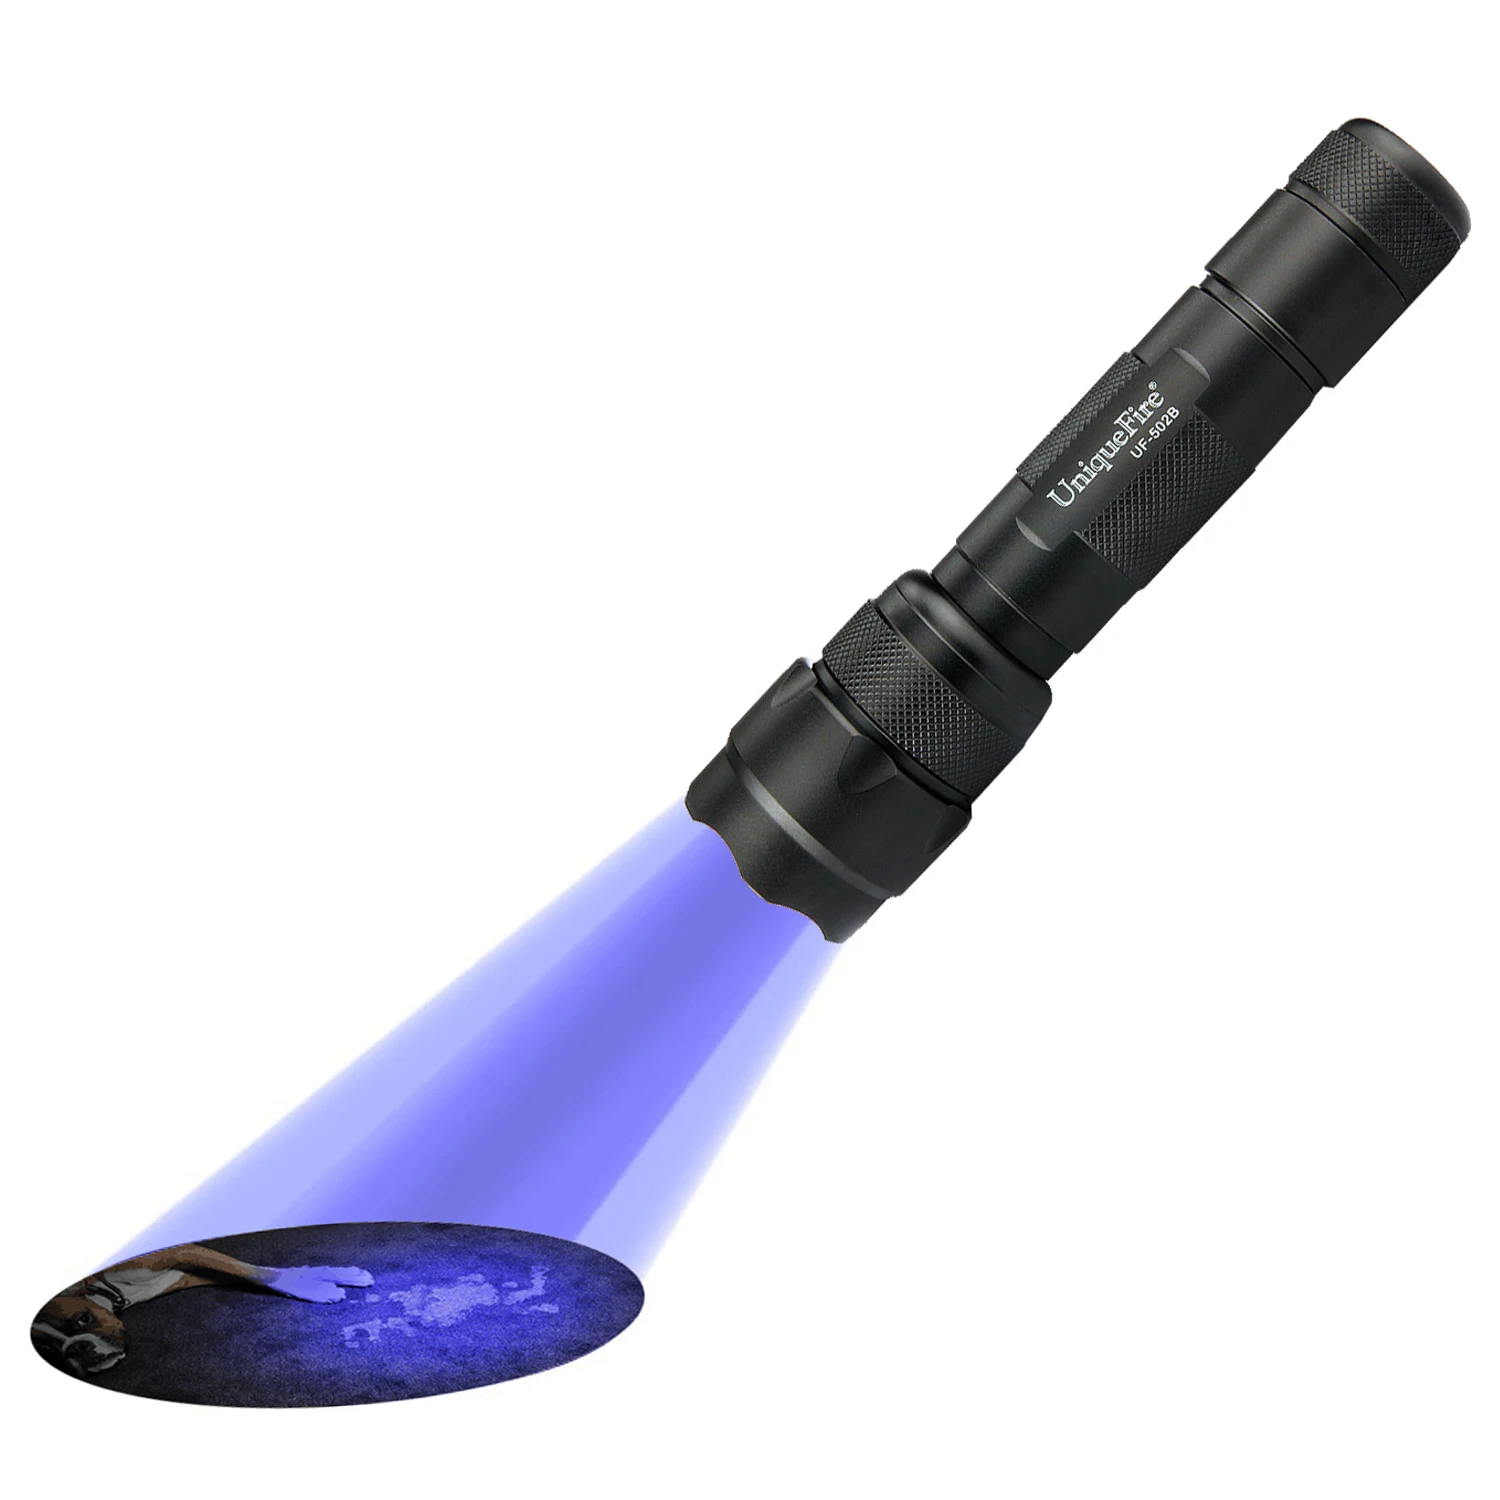 

UniqueFire 502B UV 365nm Ultraviolet LED Flashlight Mini Blacklight Rechargeable Lamp Torch for Pets Urine And Stains Detector